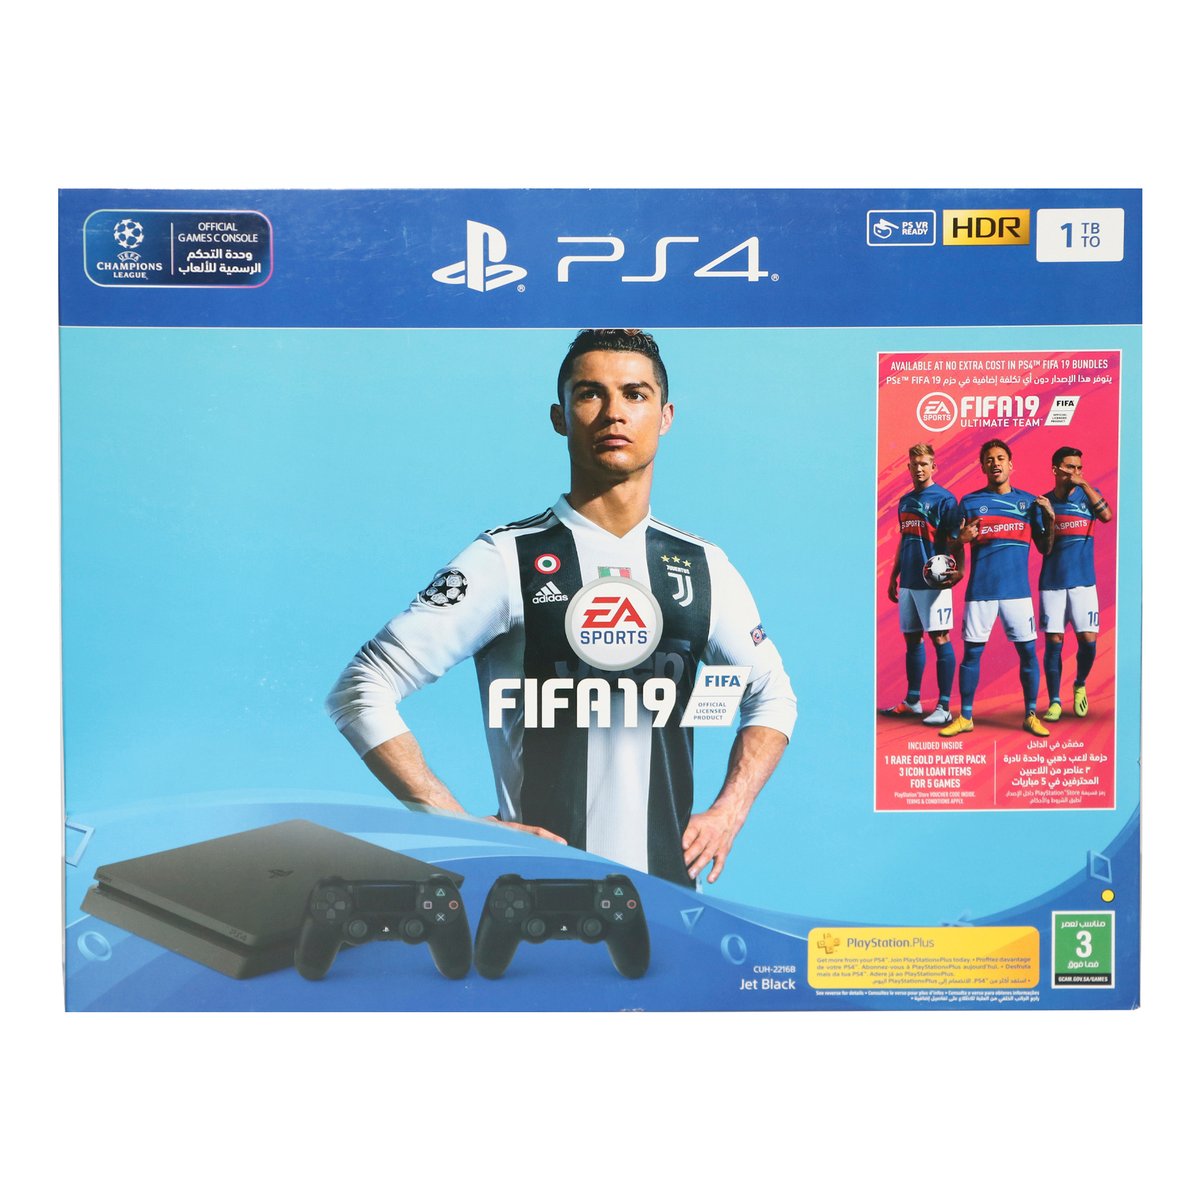 Sony PlayStation4 1TB+Fifa 19+2 Controllers